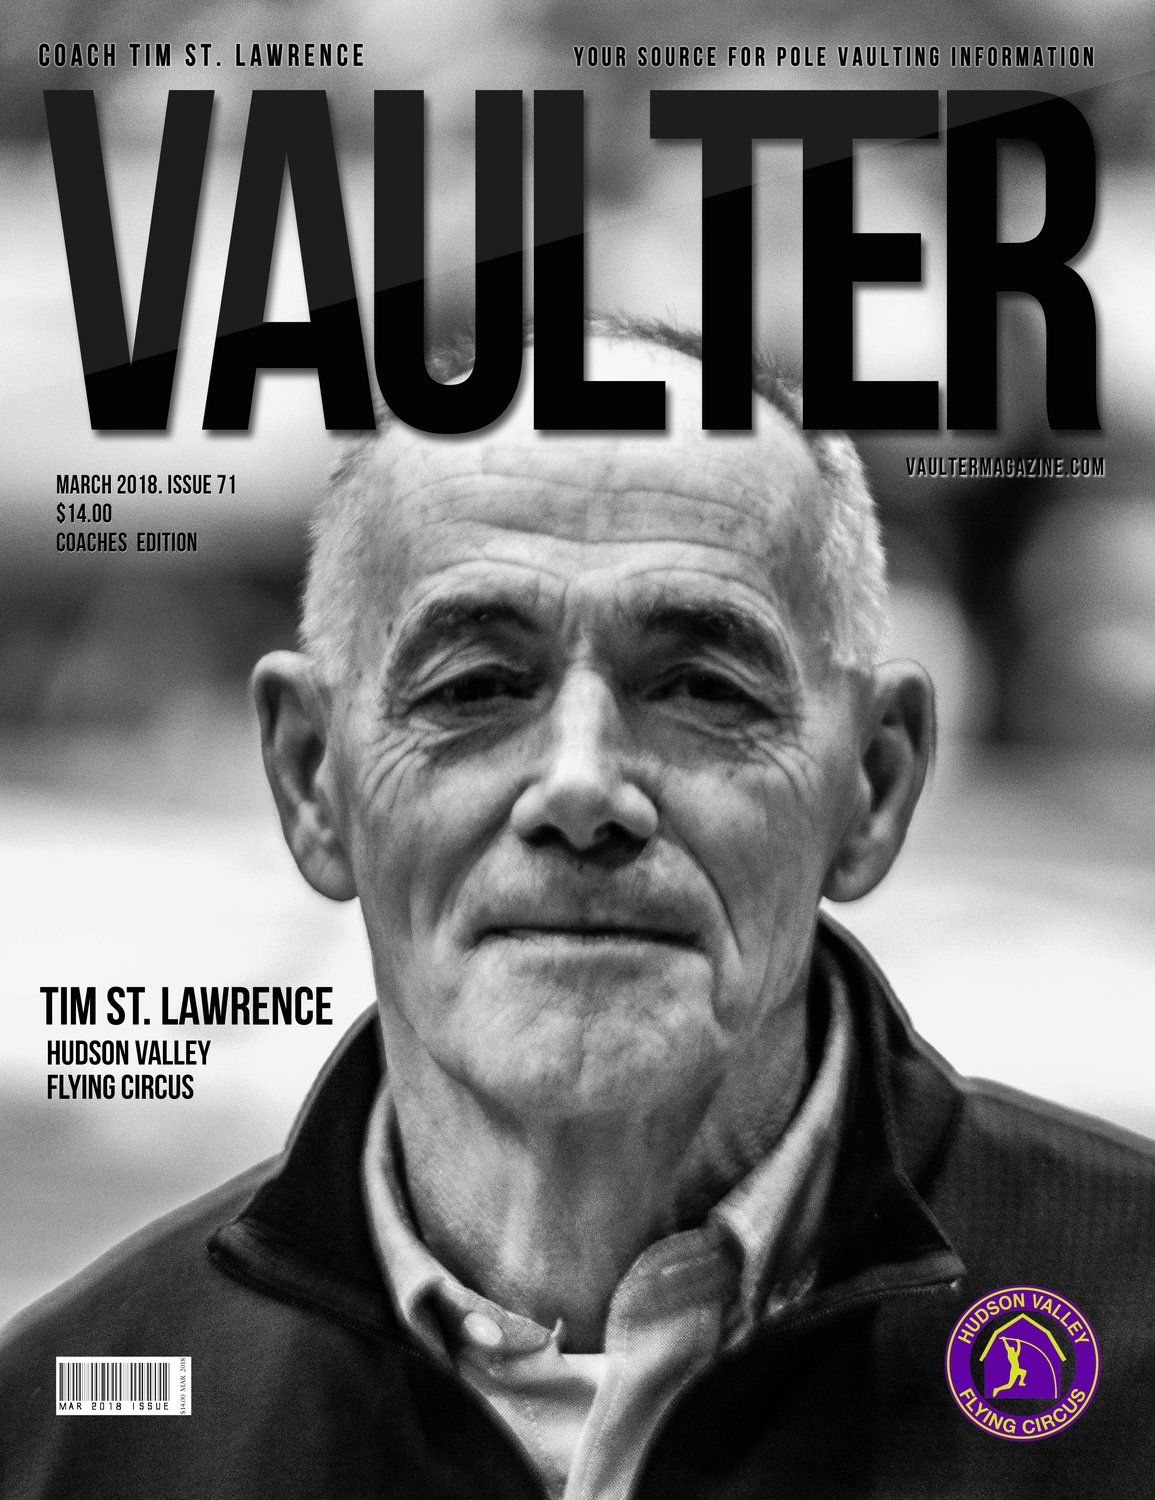 March 2018 Coach Tim St. Lawrence Issue  of Vaulter Magazine Cover Poster for Vaulter Magazine